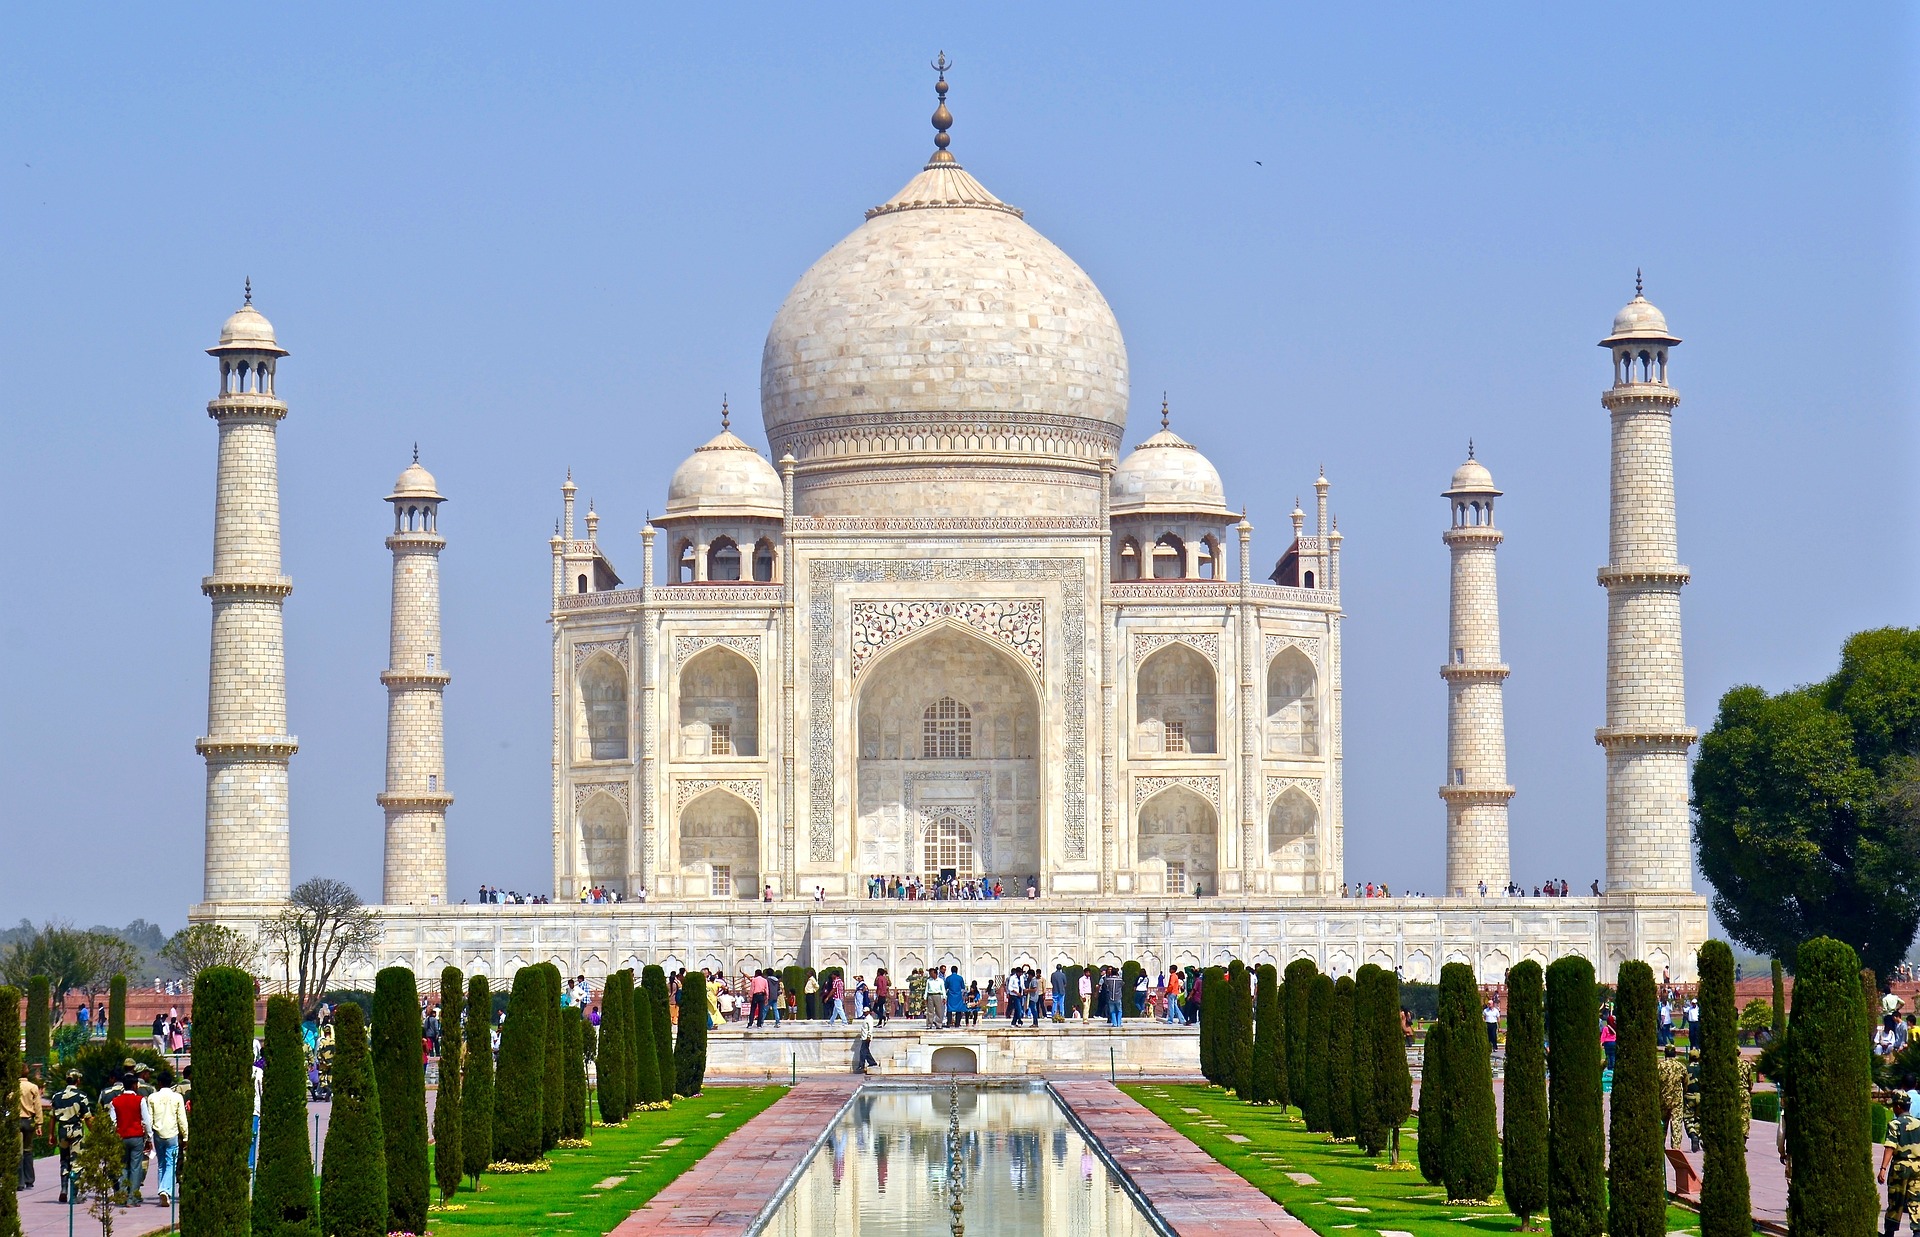 Beautiful white marble structure of Taj Mahal with clear blue sky in the background